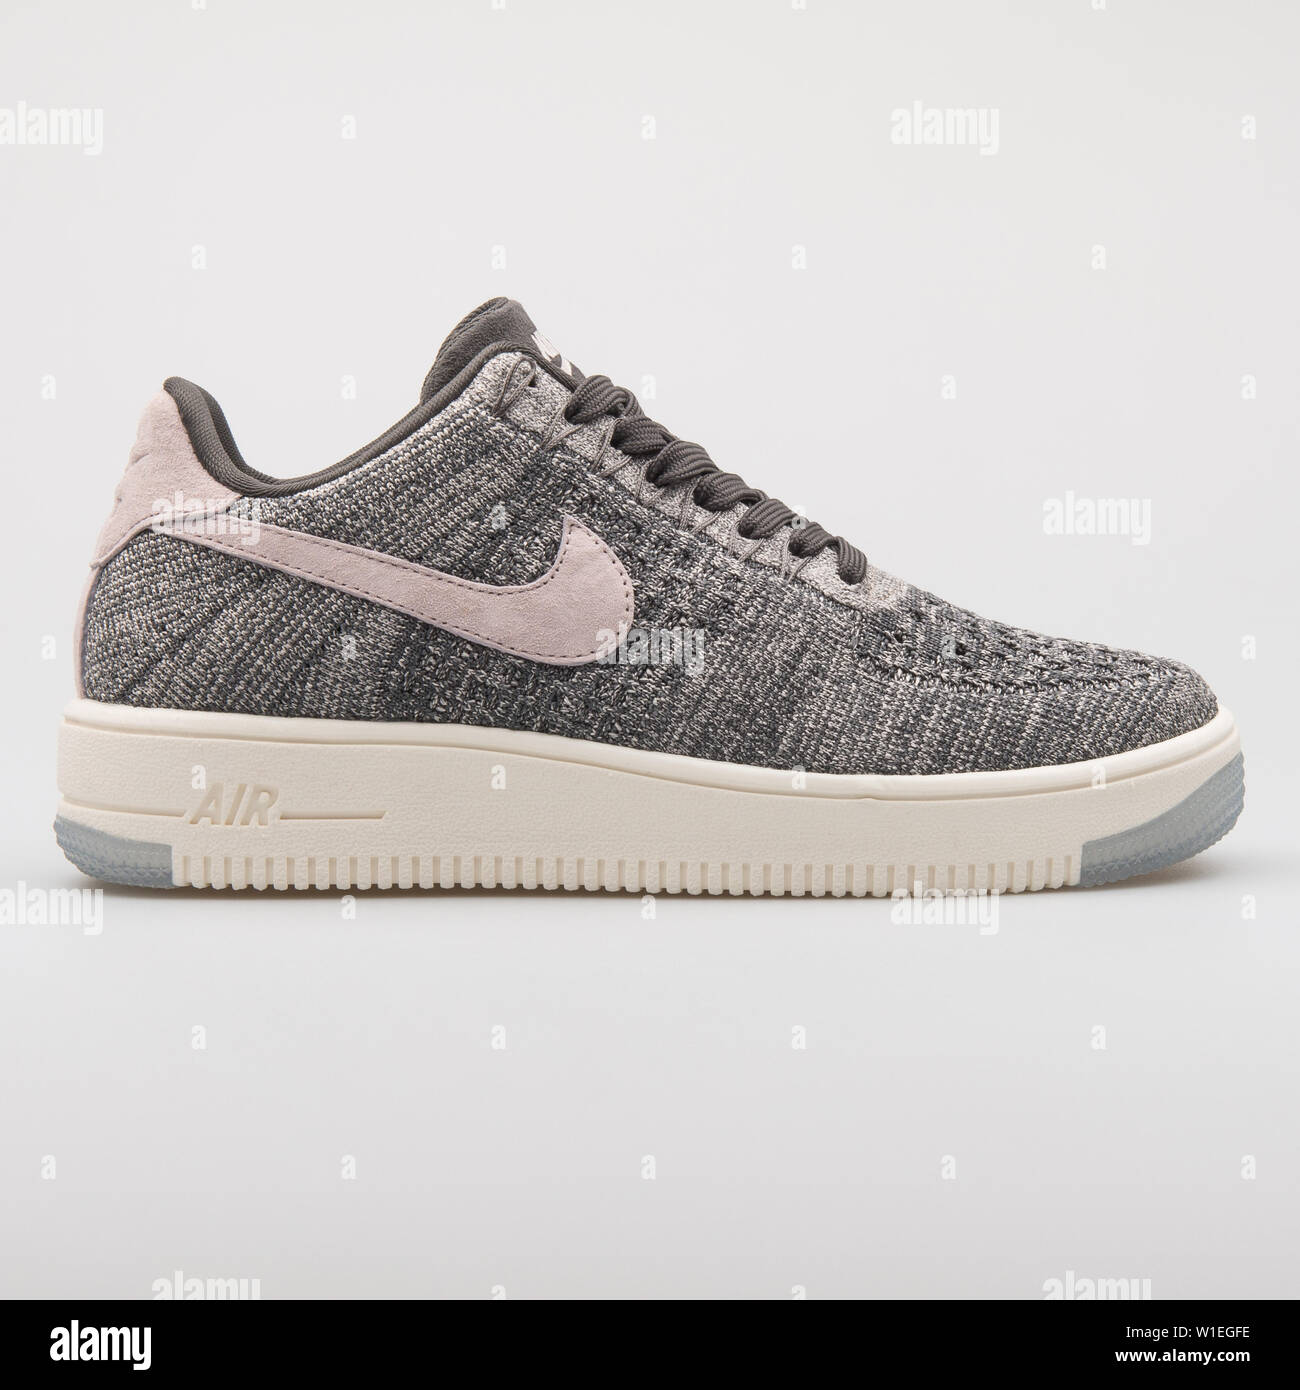 VIENNA, AUSTRIA - AUGUST 7, 2017: Nike Air Force 1 Ultra Flyknit Low grey  and pink sneaker on white background Stock Photo - Alamy